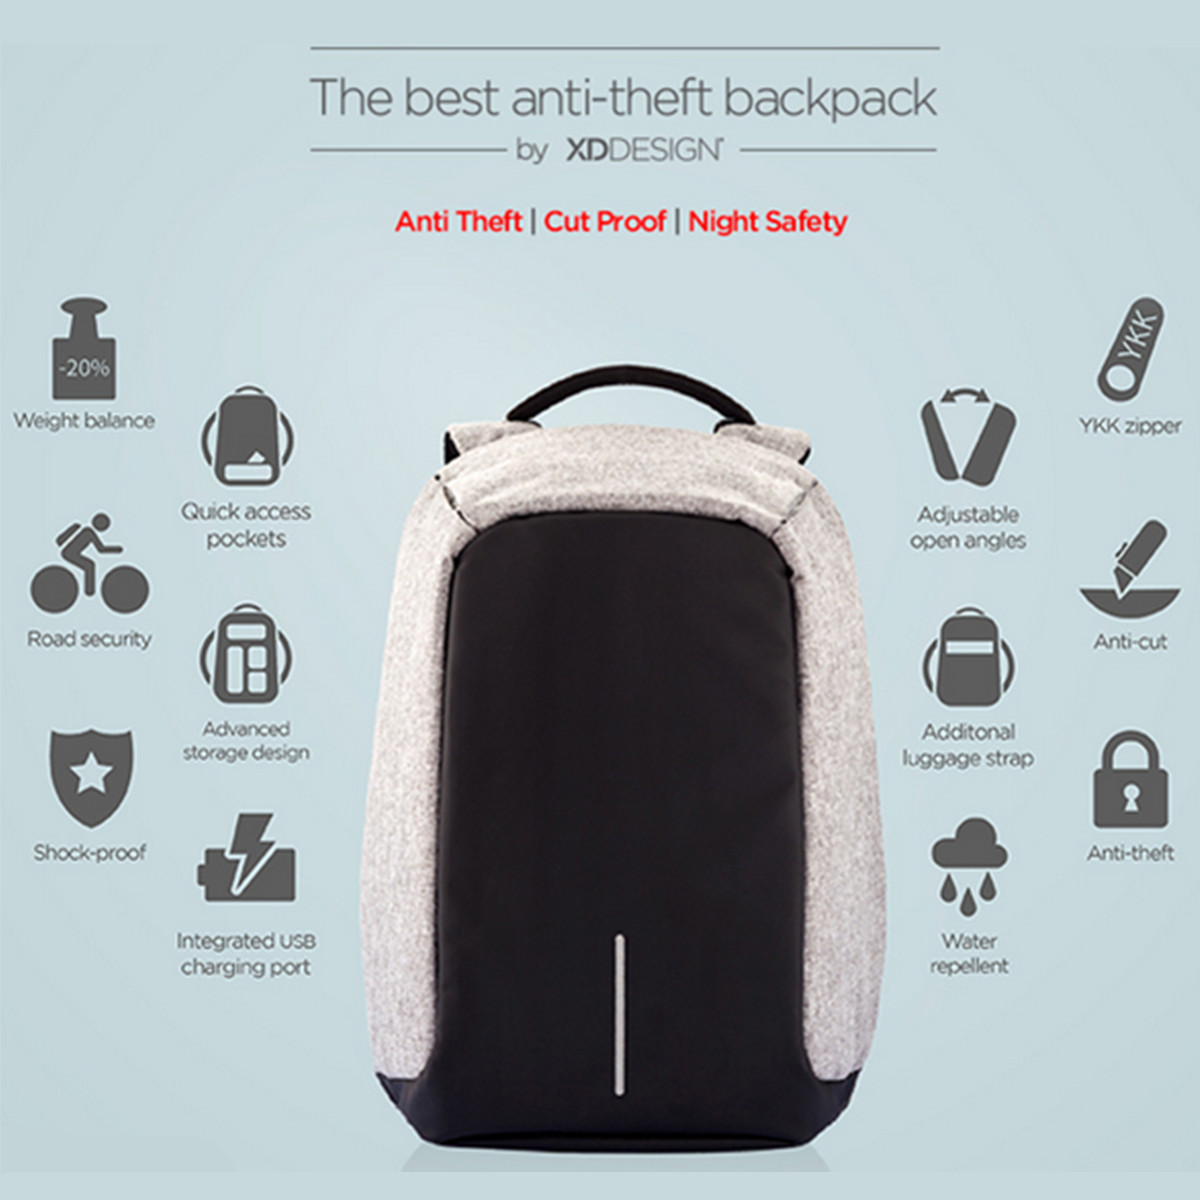 Anti-Theft-Laptop-Notebook-Backpack-Bag-Travel-Bag-With-External-USB-Charging-Port-1215267-1